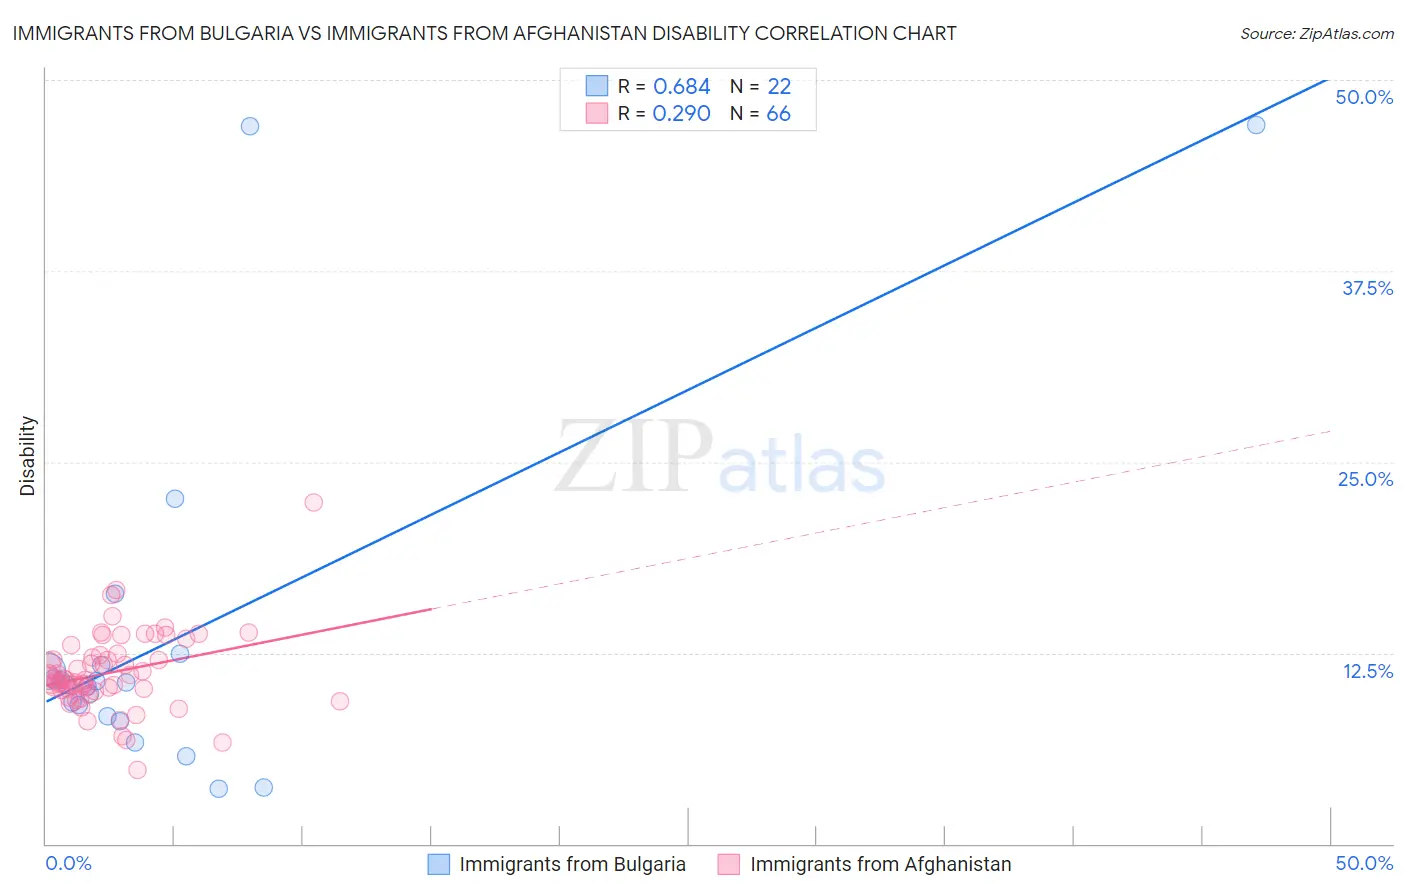 Immigrants from Bulgaria vs Immigrants from Afghanistan Disability